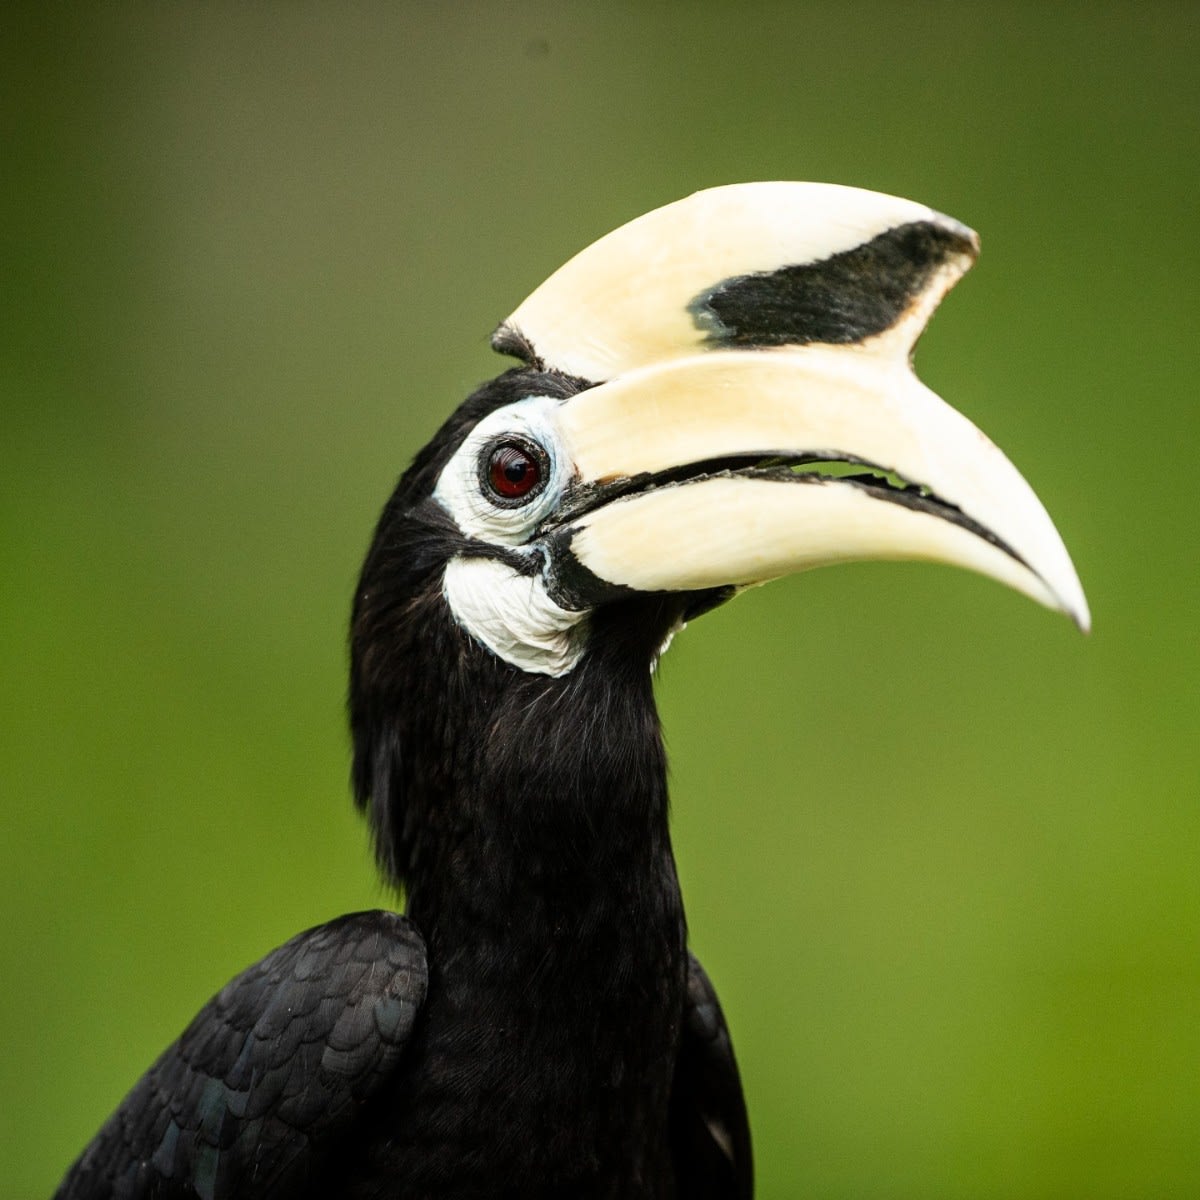 Of the 54 species of hornbill, the Oriental pied has the most diverse diet, from fruit to bats! Eden: Untamed Planet explores some of the world's most isolated landscapes. Find out where to watch in your region → https://t.co/kSO2jOdEqC EarthOnLocation by © Cede Prudente